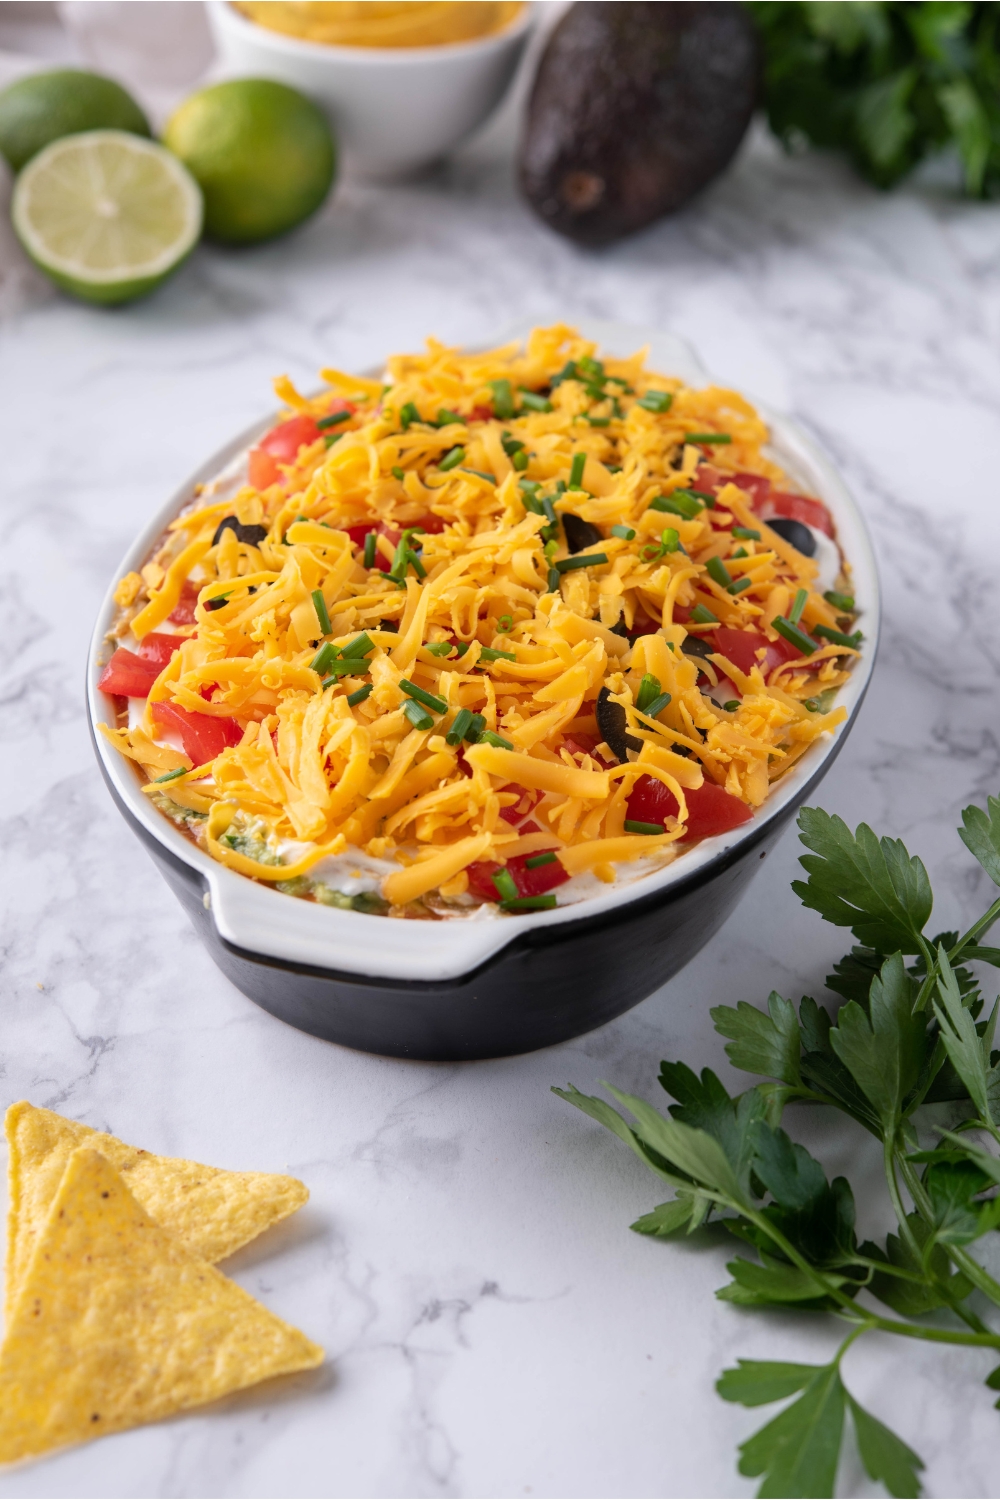 7 layer dip in a black and white baking dish, surrounded by tortilla chips and ingredients for making 7 layer dip.